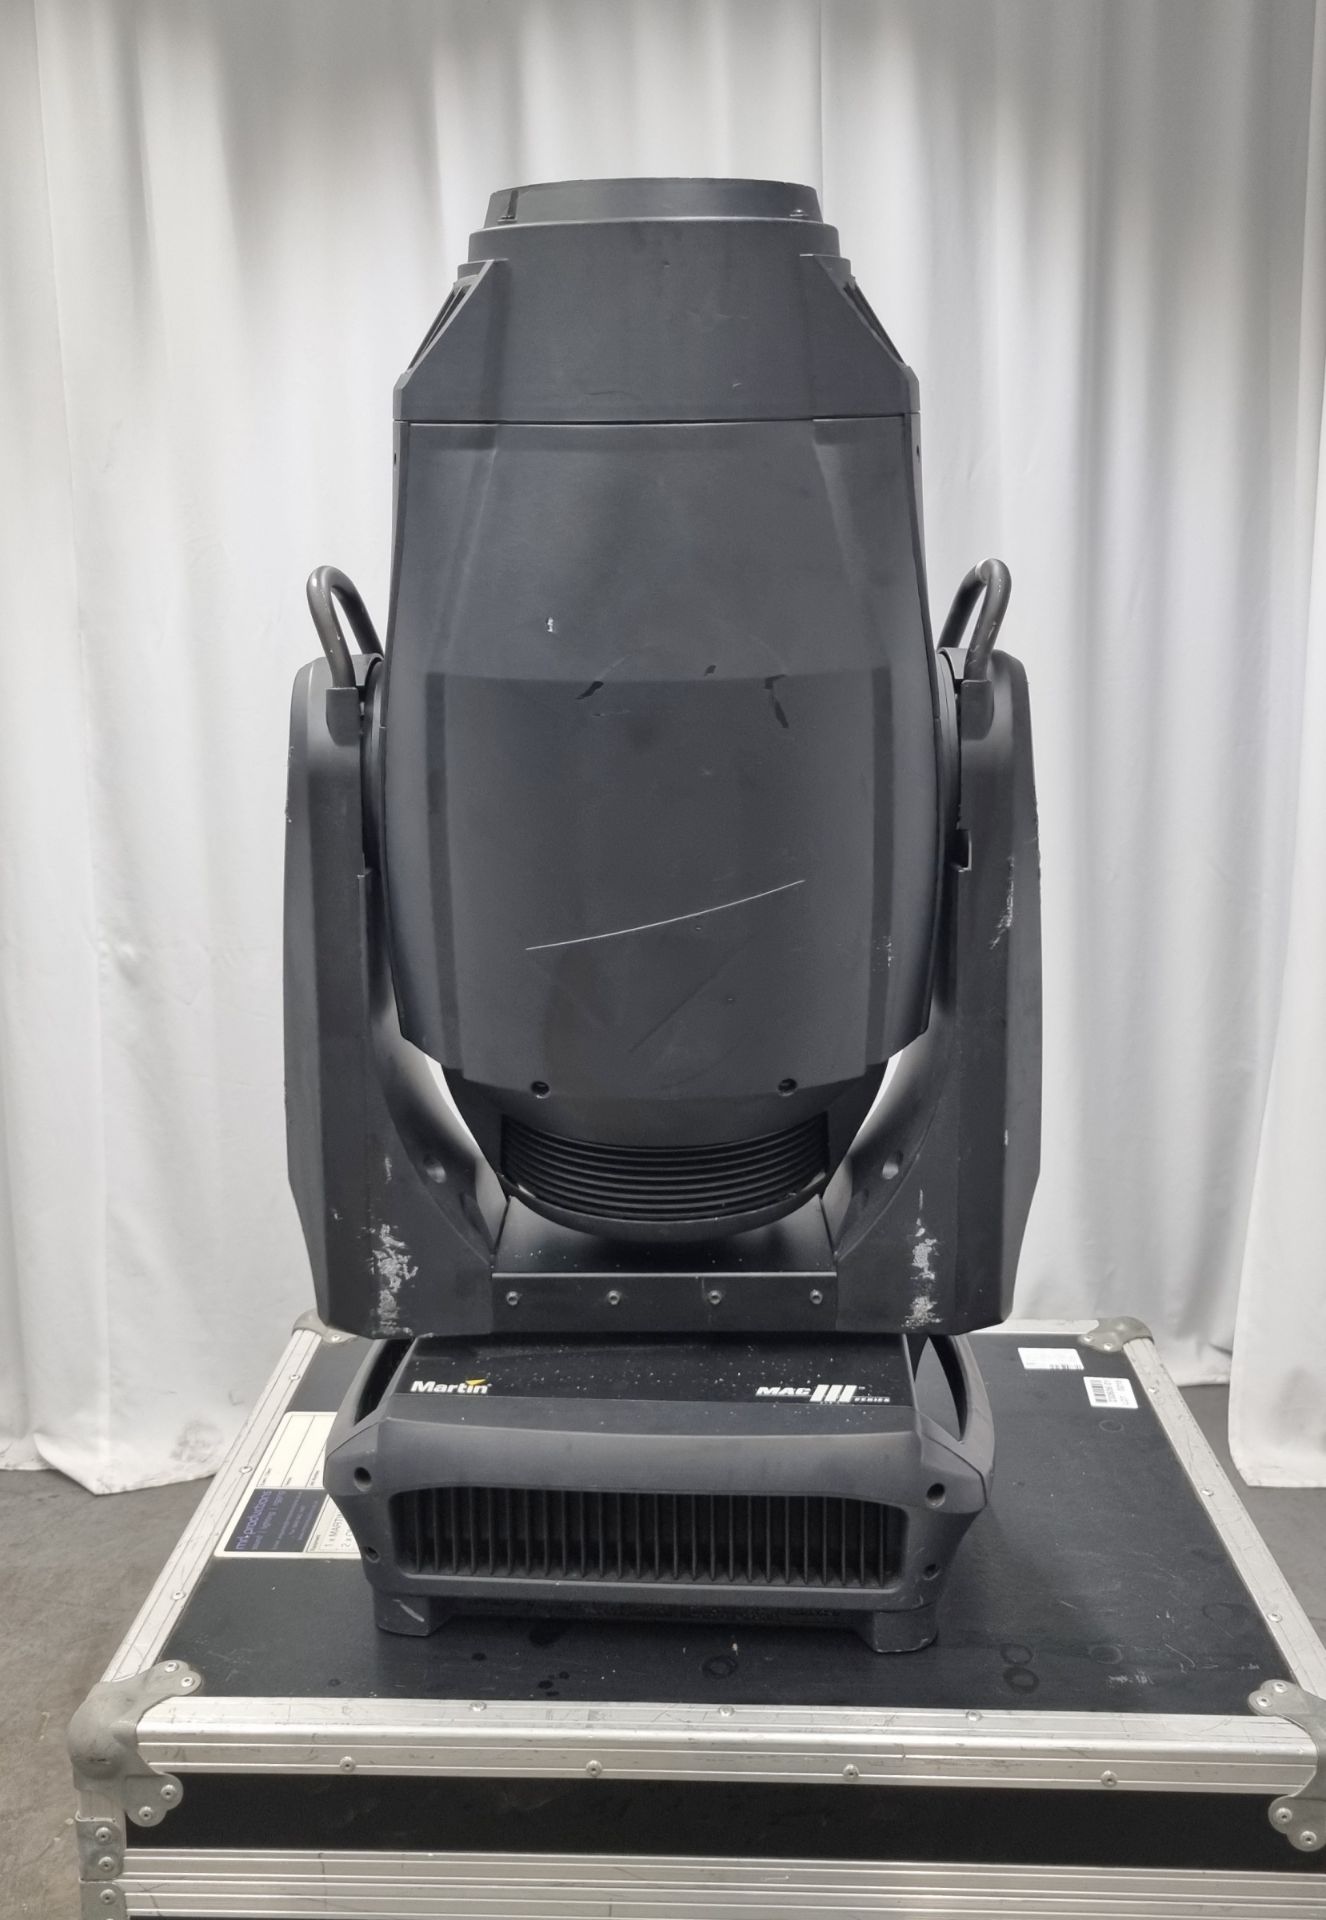 Martin Mac III Profile 1800W high output moving light with flight case on wheels - L 800 x W 600 x H - Image 4 of 8